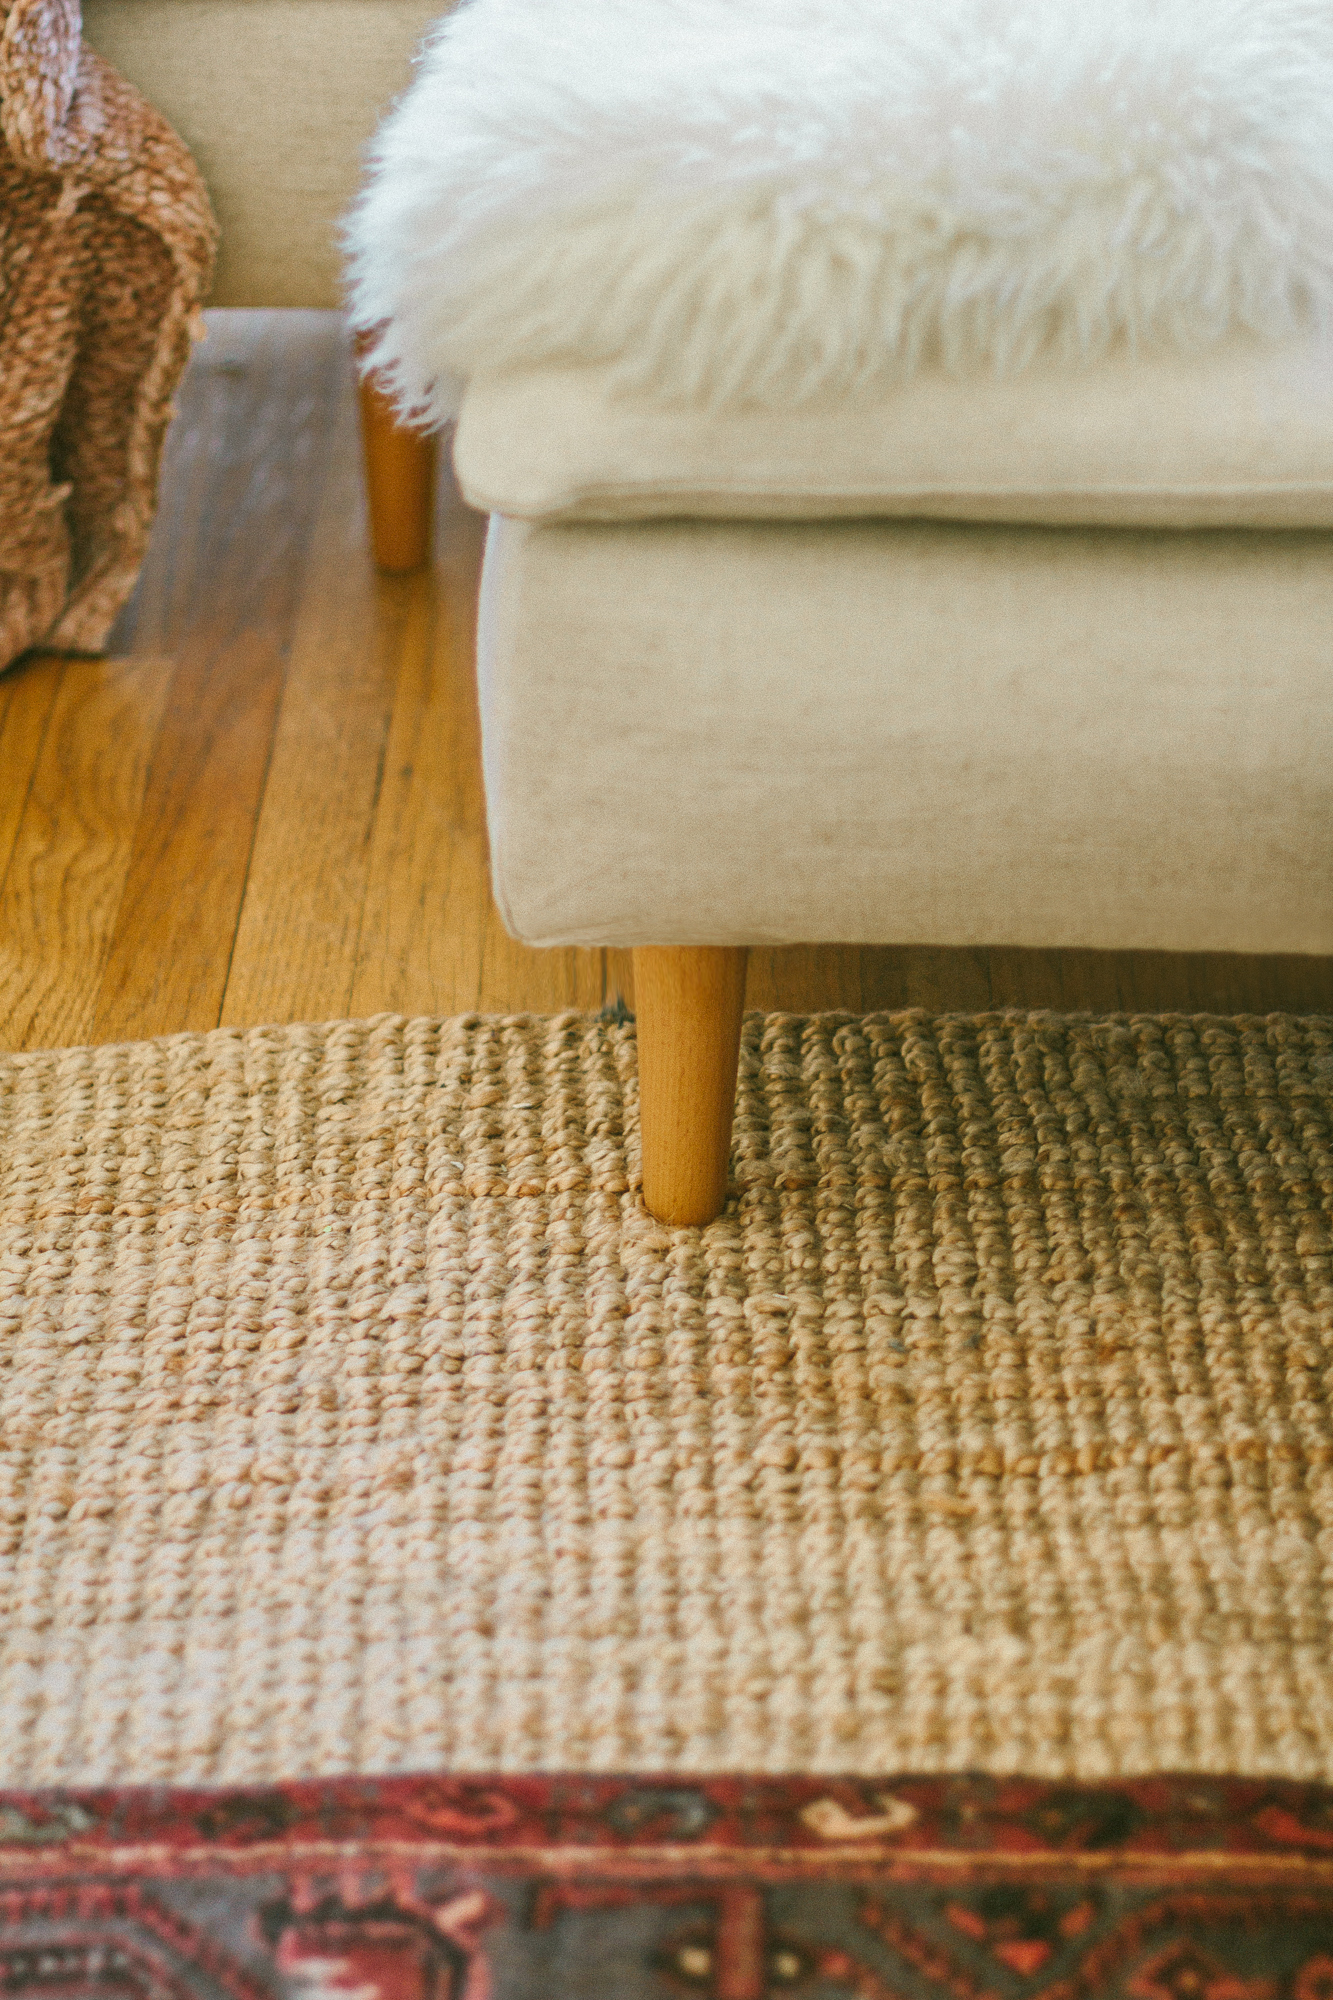  When I found out Comfort Works also provides wooden sofa legs, I was super excited. I’d always hated the steel legs that came with our sofa! These round beech legs were what I had wanted all along.  